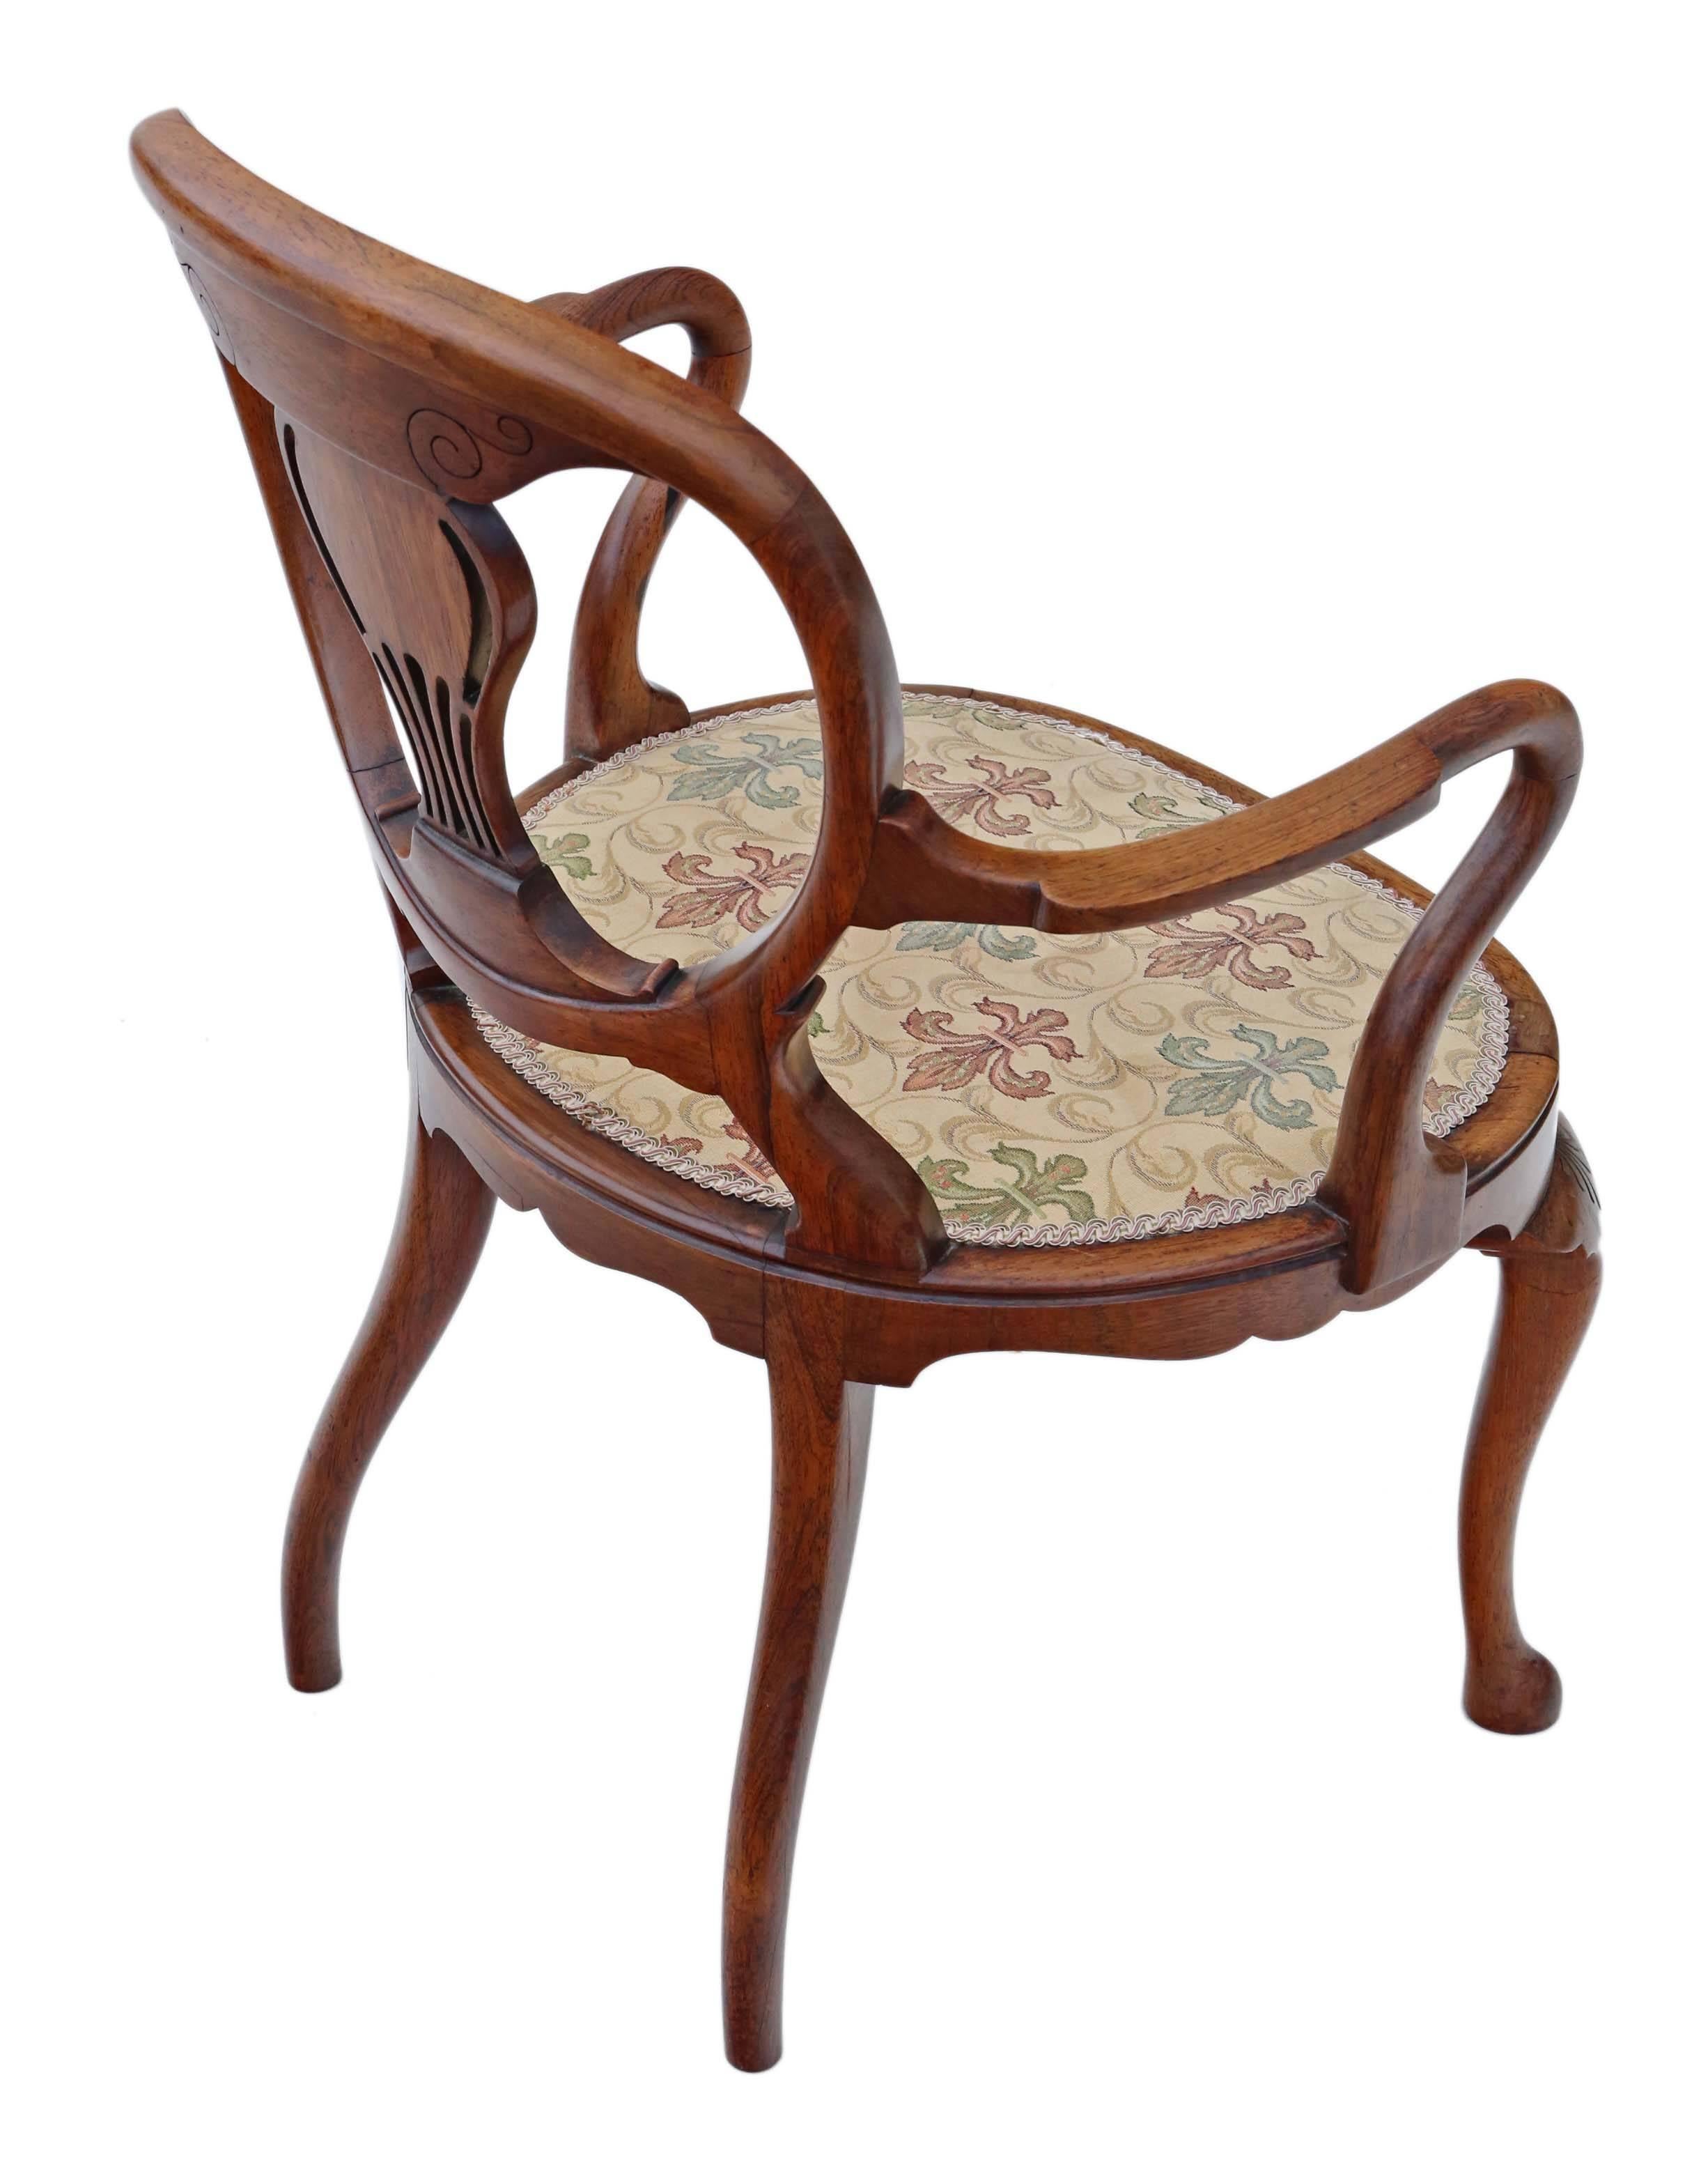 British Antique Quality Brass Inlaid Rosewood Elbow Desk Chair Carver For Sale